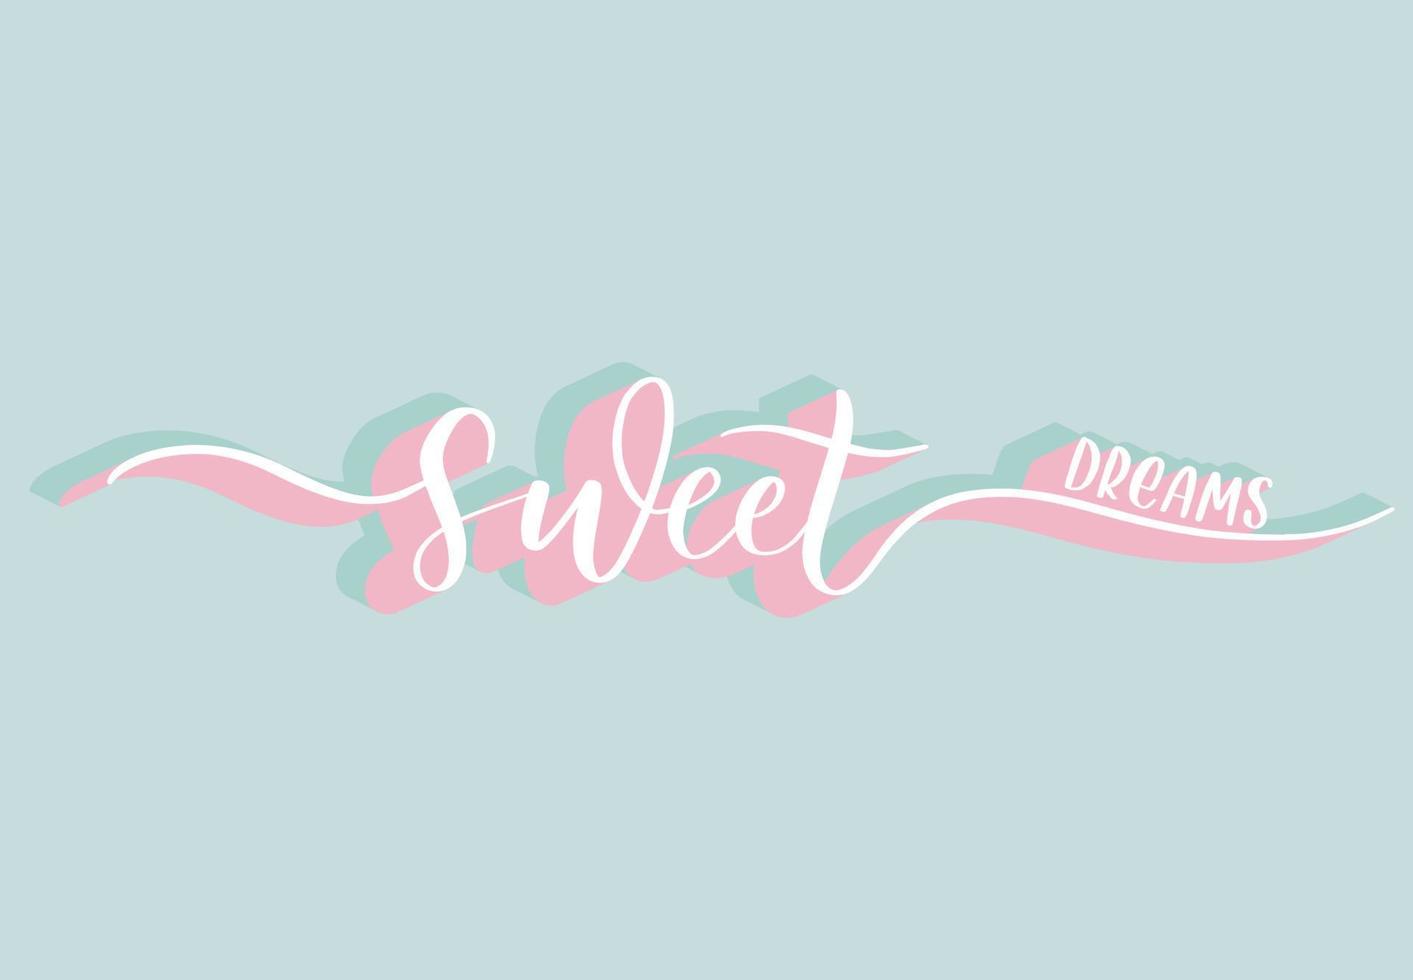 Sweet dreams - calligraphy poster with stars. vector